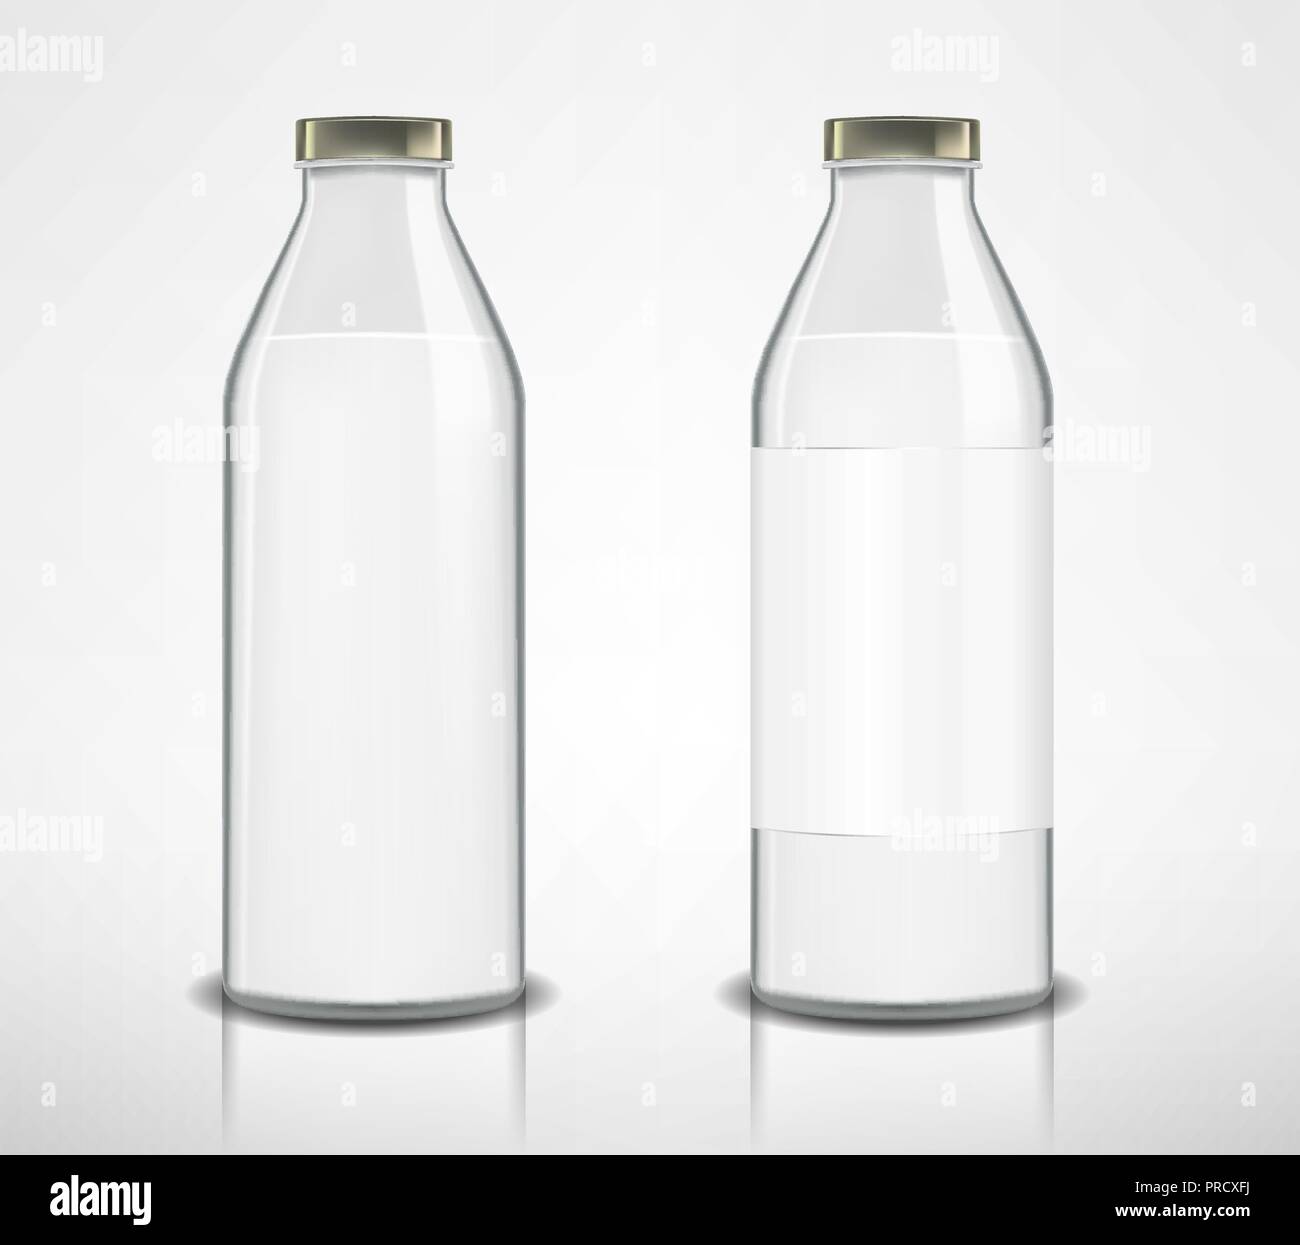 Set of glass bottles with milk isolated. Milk bottle in realistic style. Package mockup design ready for branding. vector illustration Stock Vector